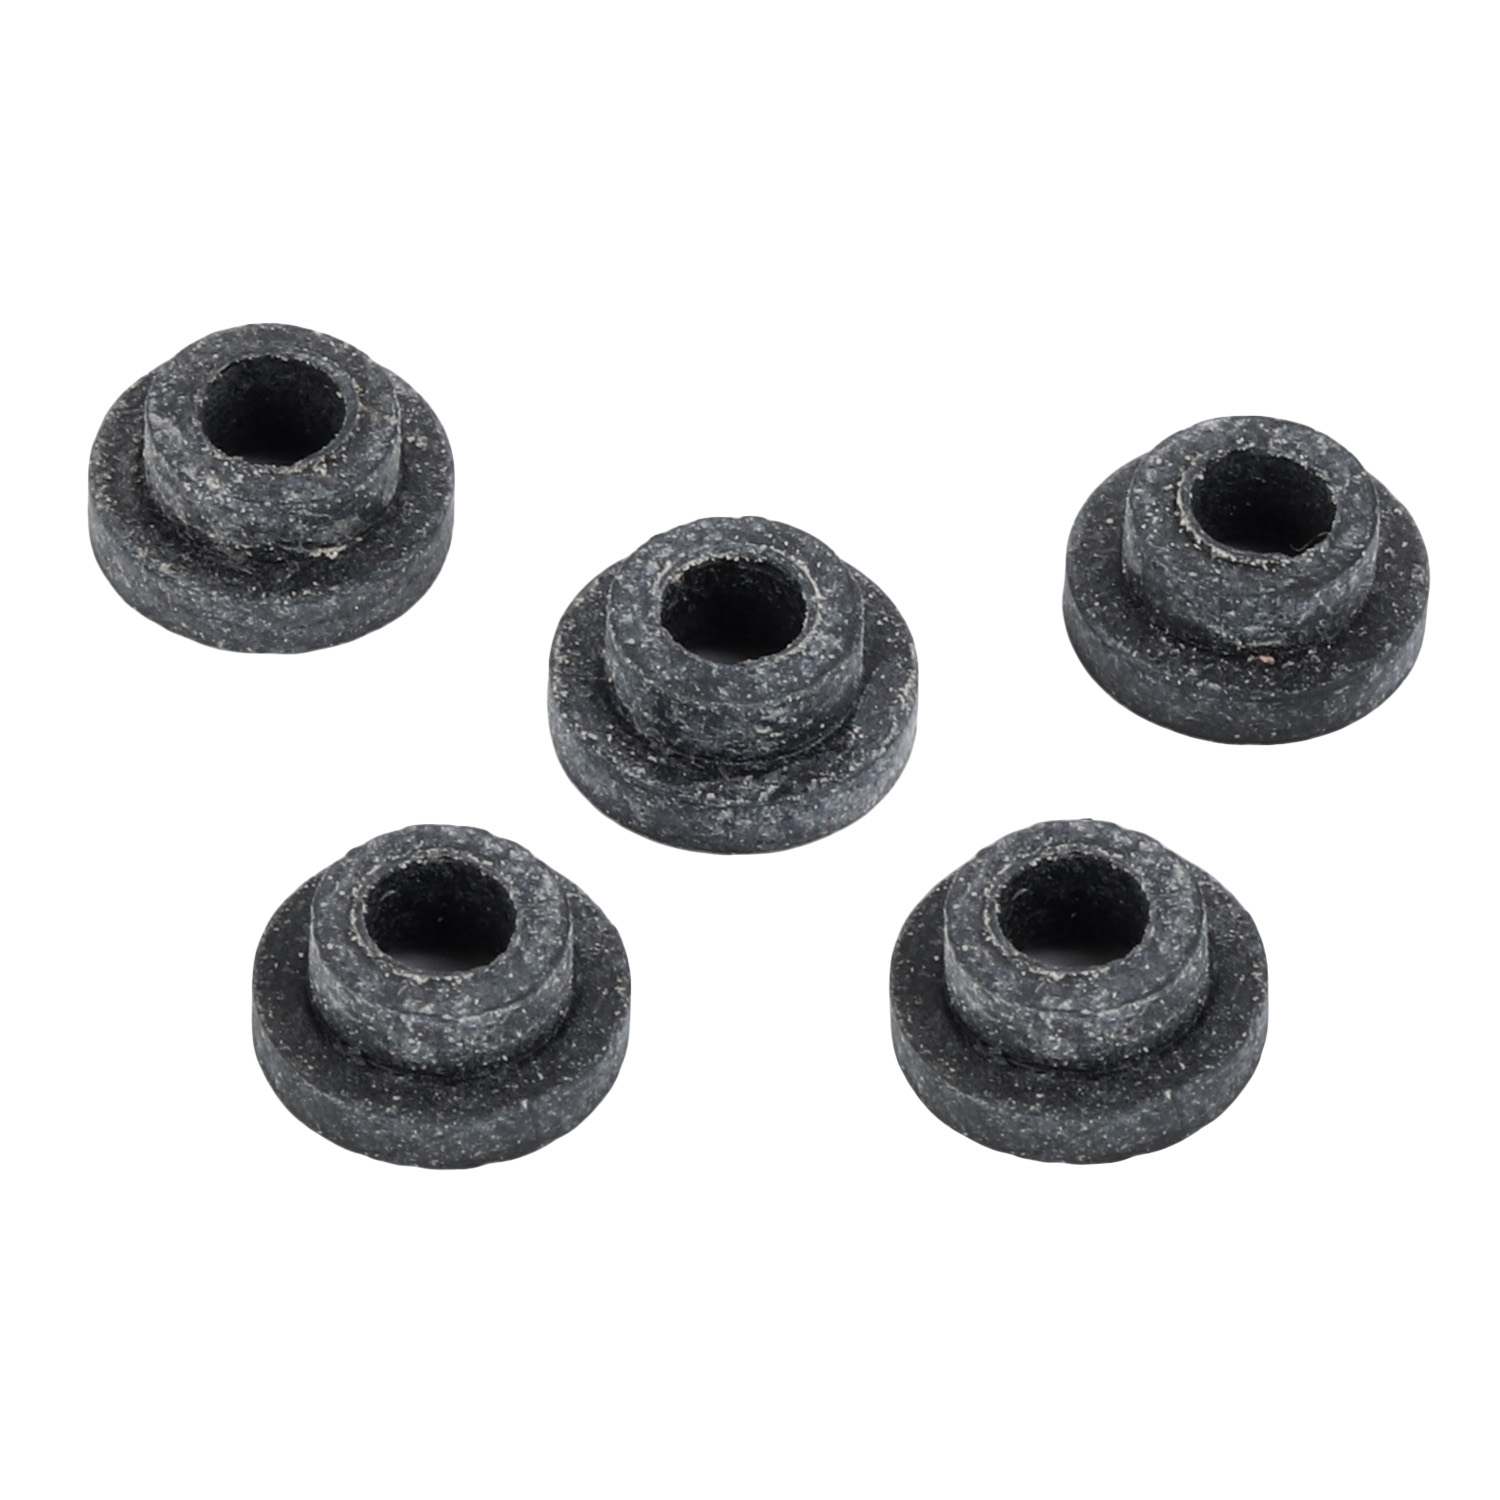 Picture of SKS Sealing Rubber Dunlop/Presta for Standard 23 - 5 pieces